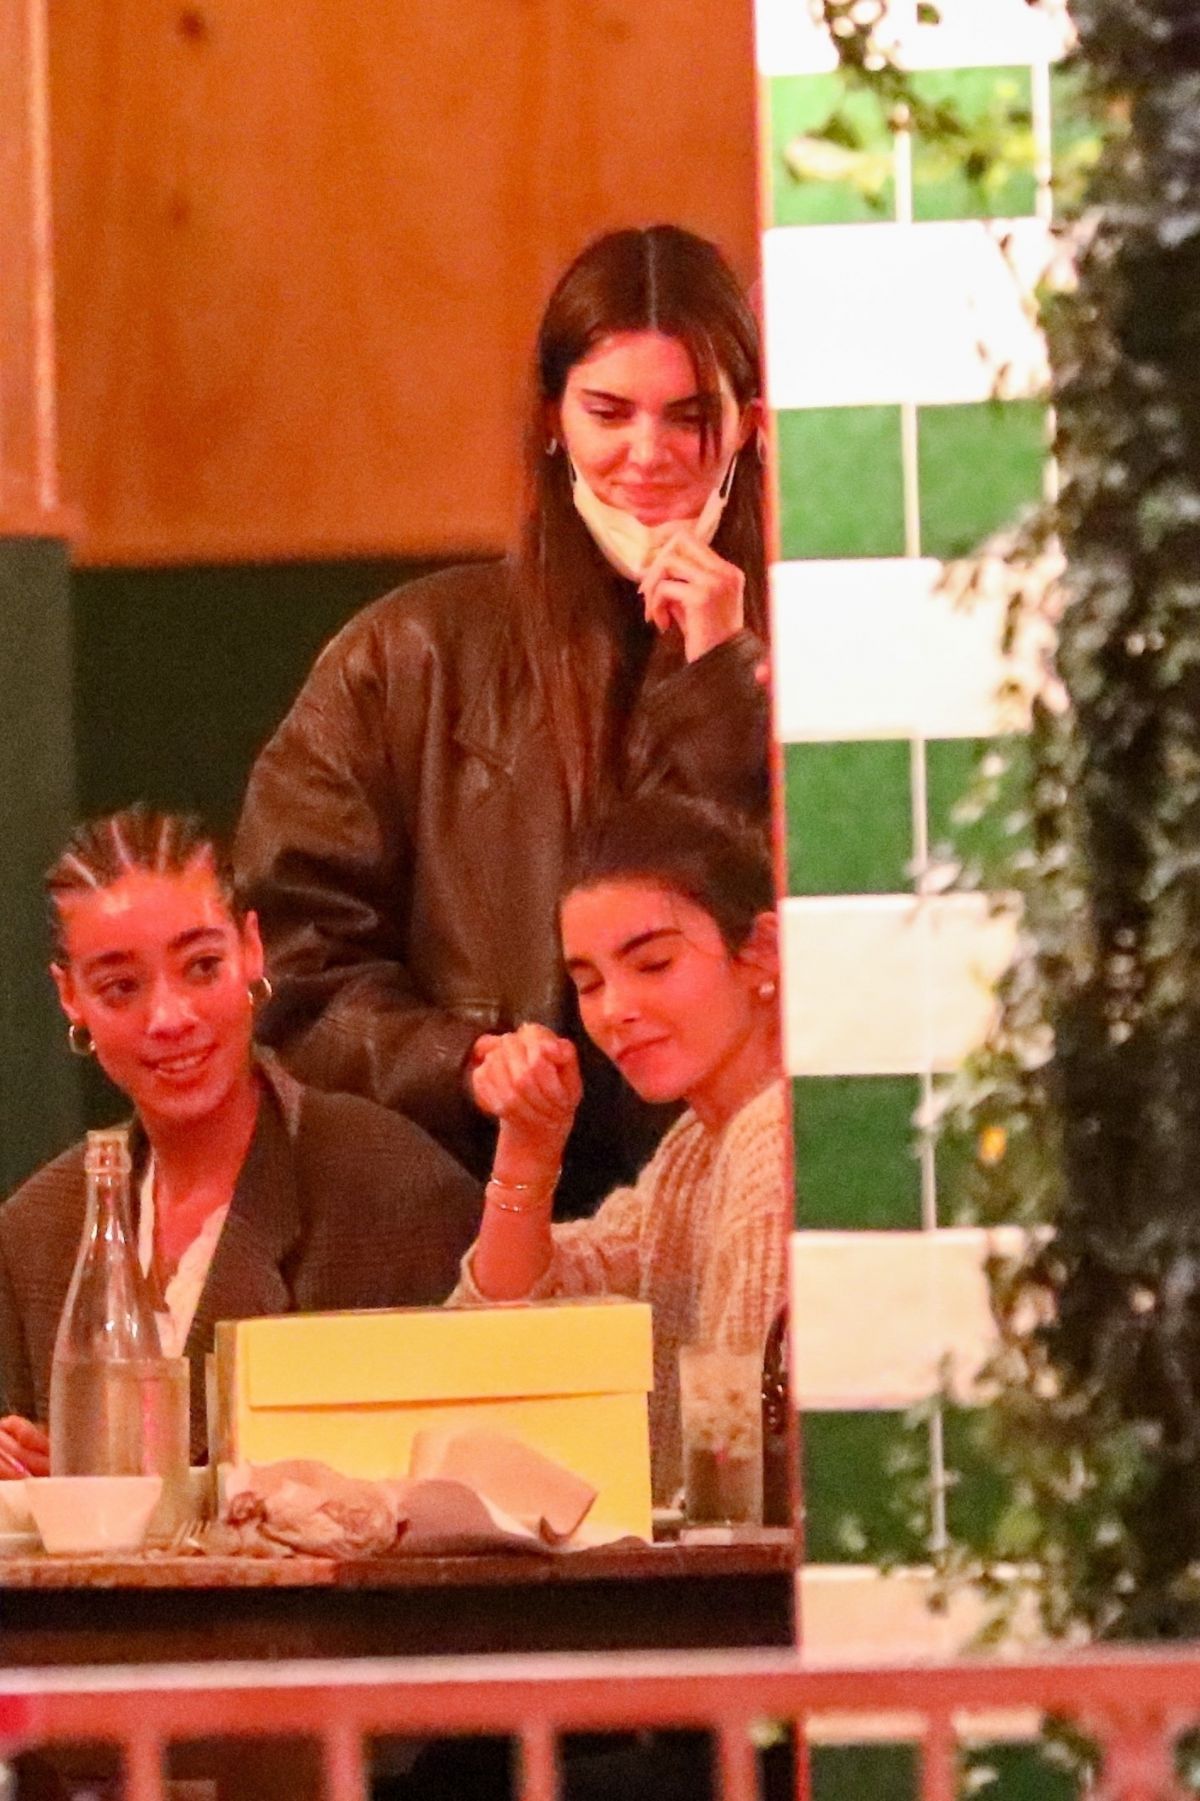 kendall-jenner-out-for-dinner-at-escuela